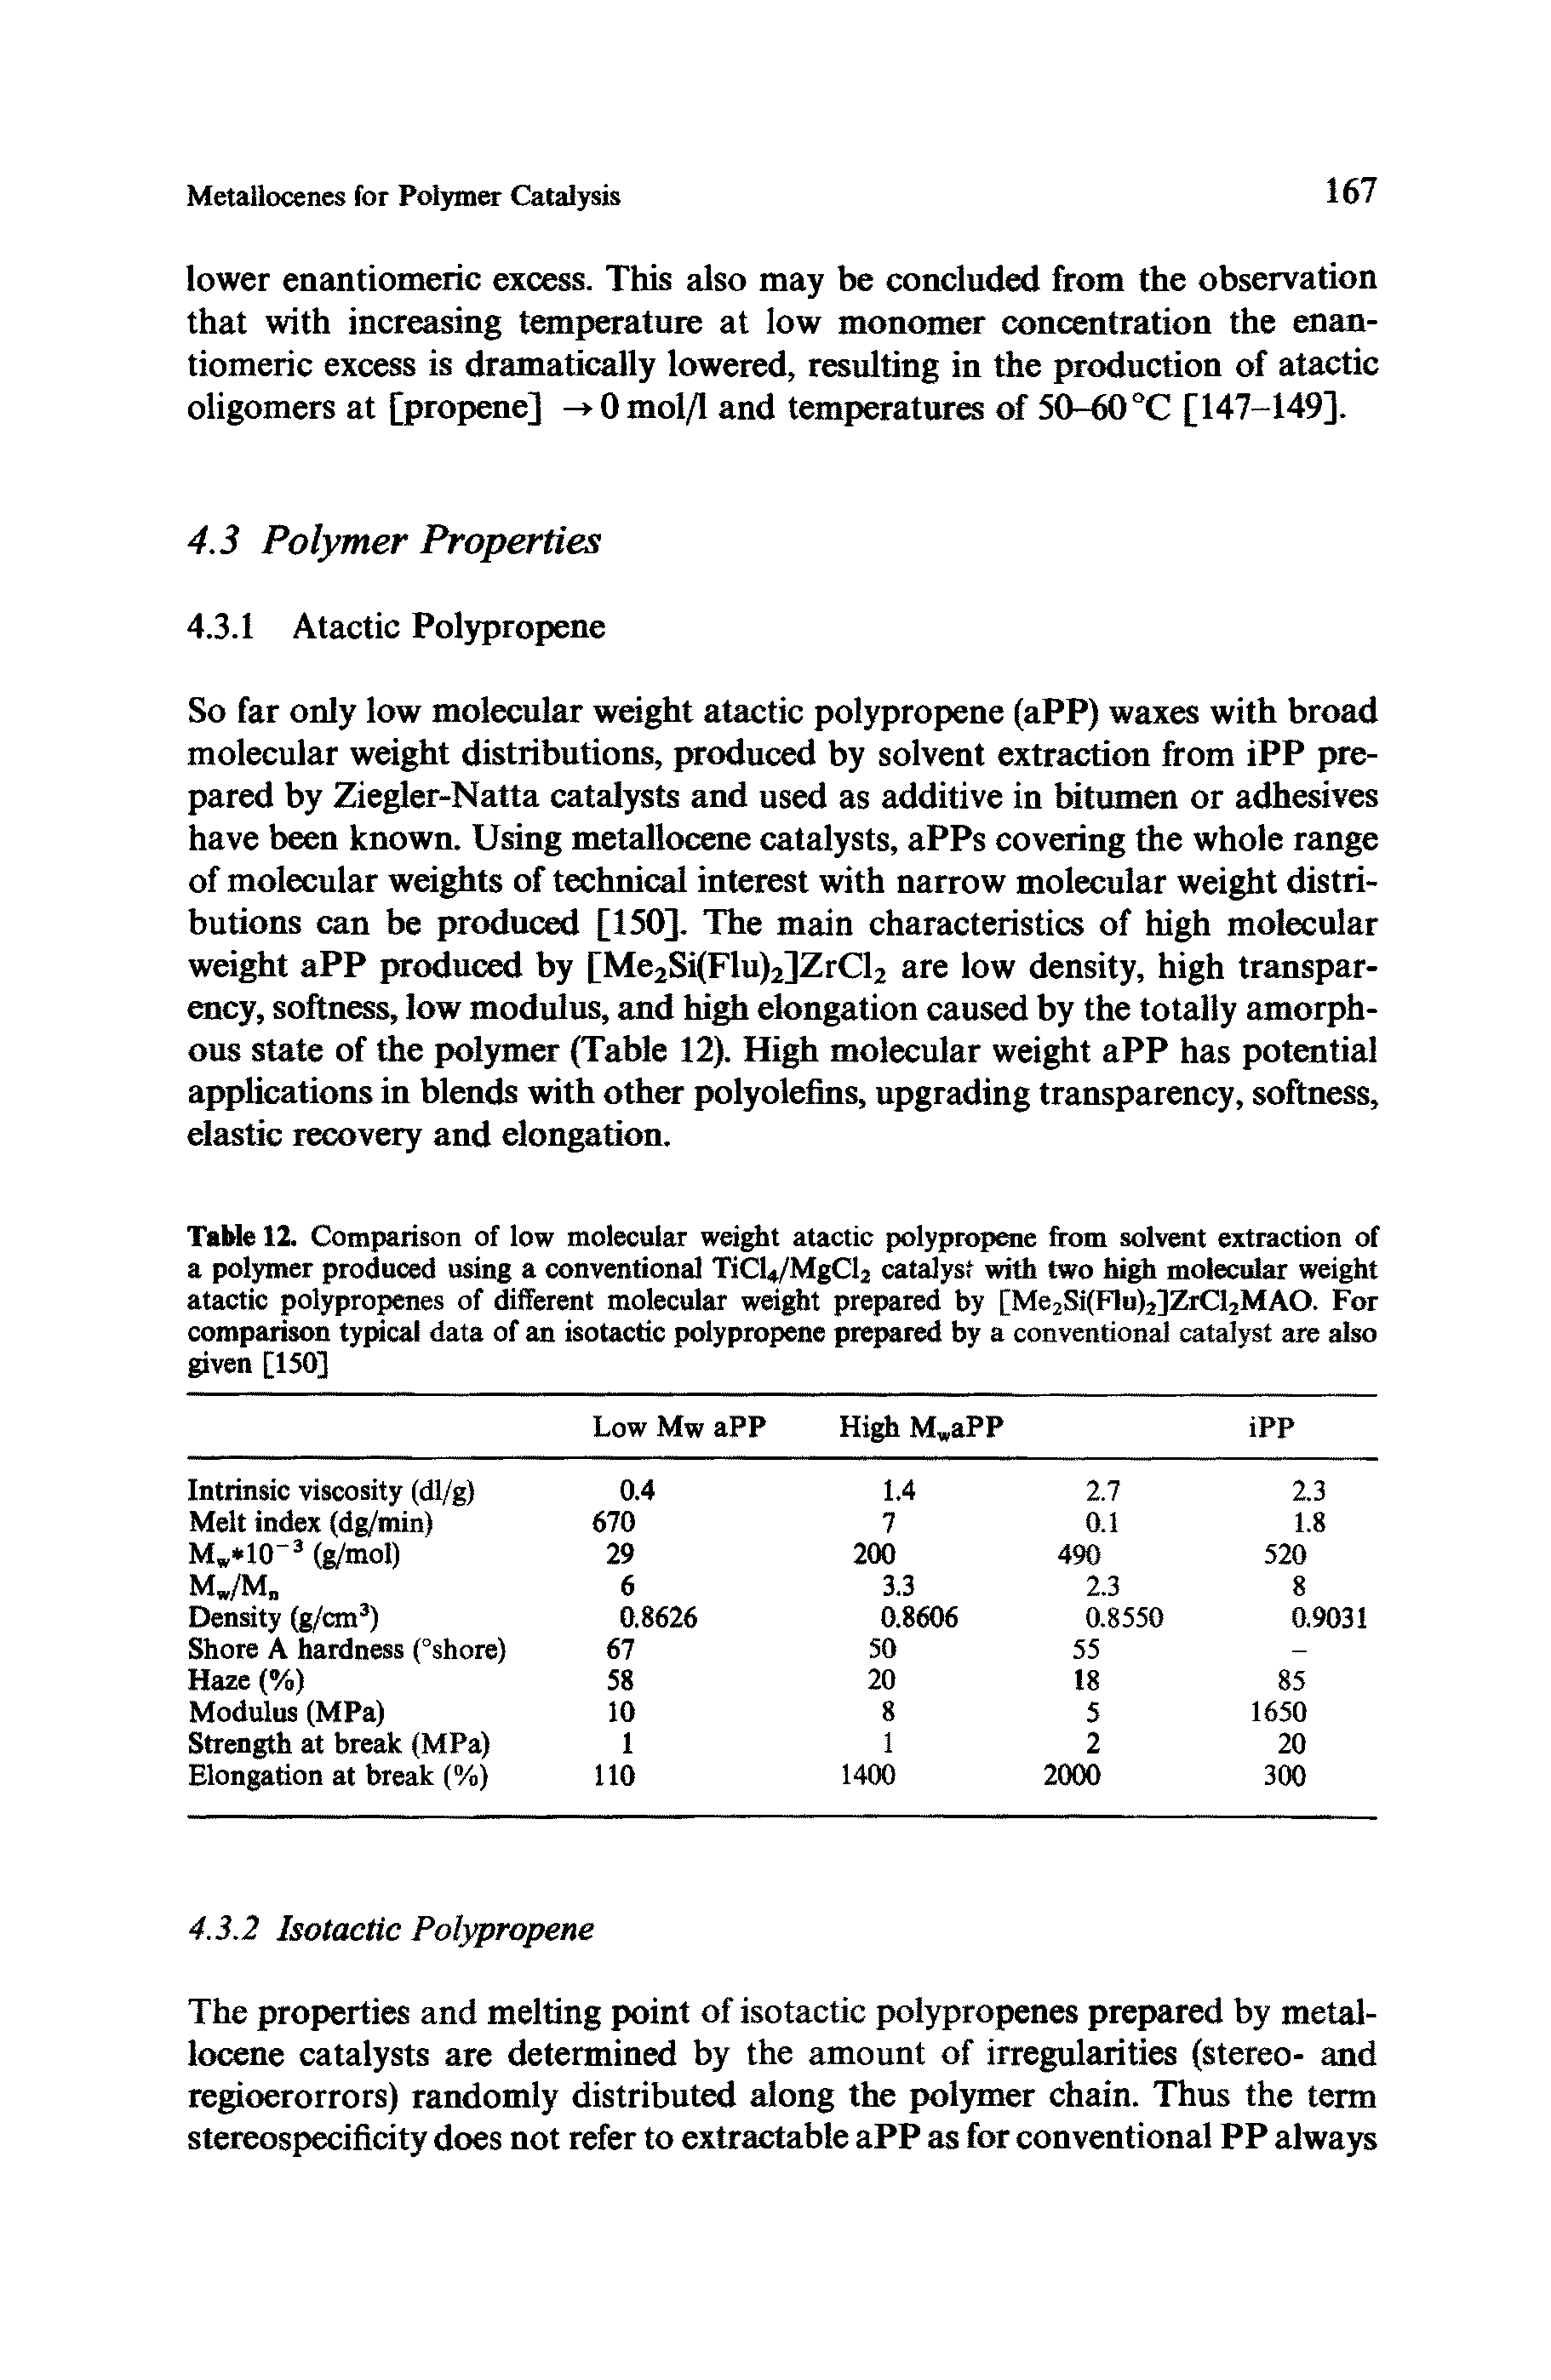 Table 12. Comparison of low molecular weight atactic polypropene from solvent extraction of a polymer produced using a conventional TiCU/MgCb catalyst with two high molecular weight atactic polypropenes of different molecular weight prepared by [Me2Si(Flu)2)ZrCl2MAO. For comparison typical data of an isotactic polypropene prepared by a conventional catalyst are also given [150]...